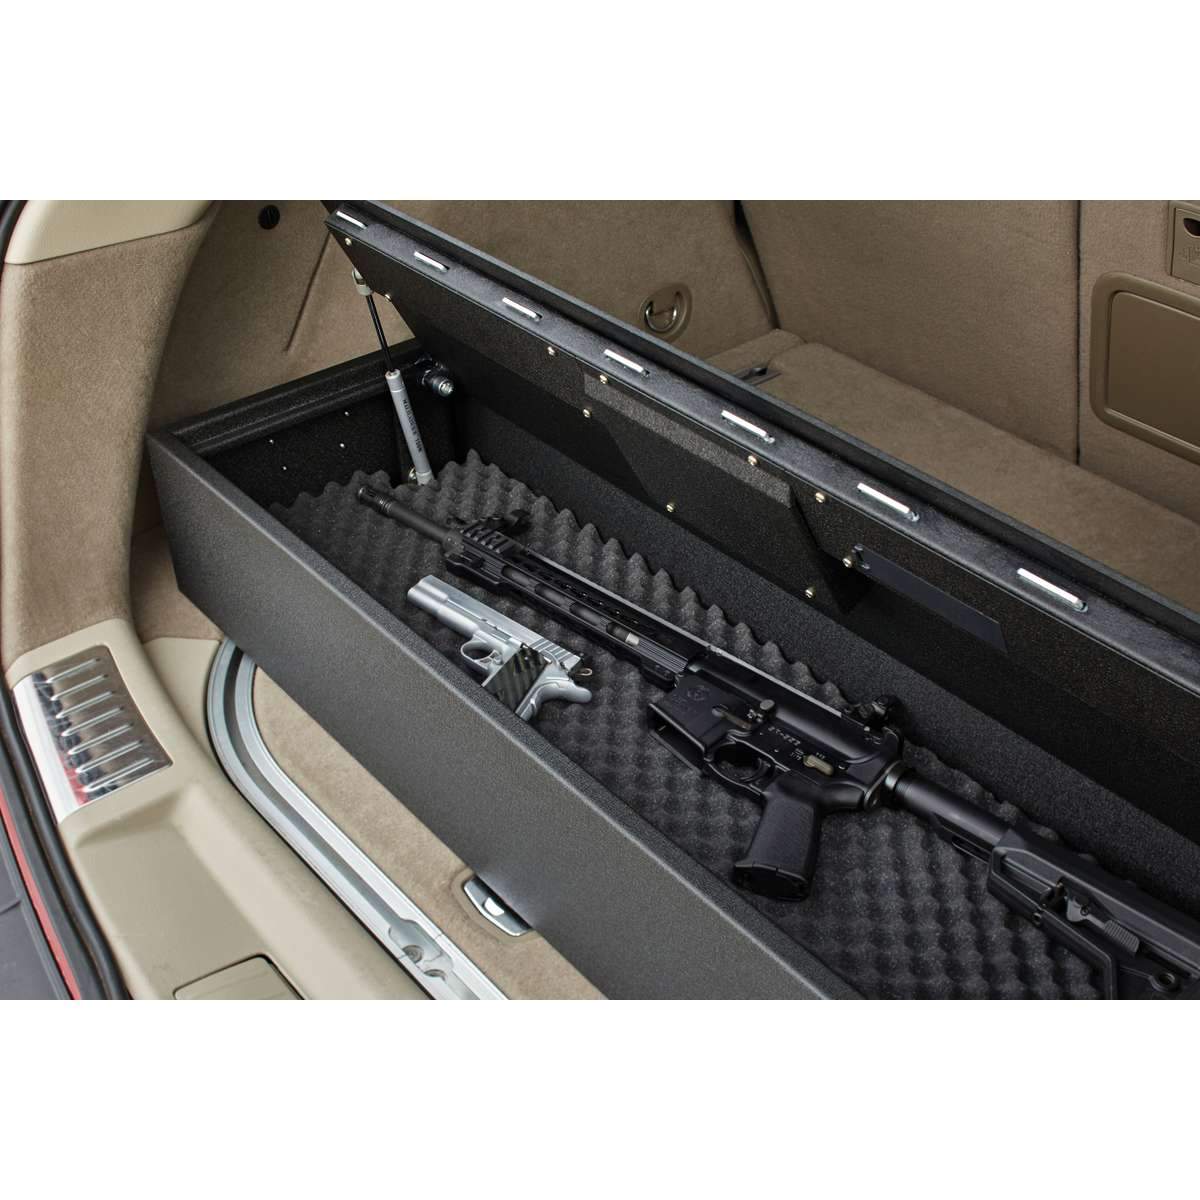 SnapSafe 75406 Trunk Safe II in back of vehicle with rifle and handgun